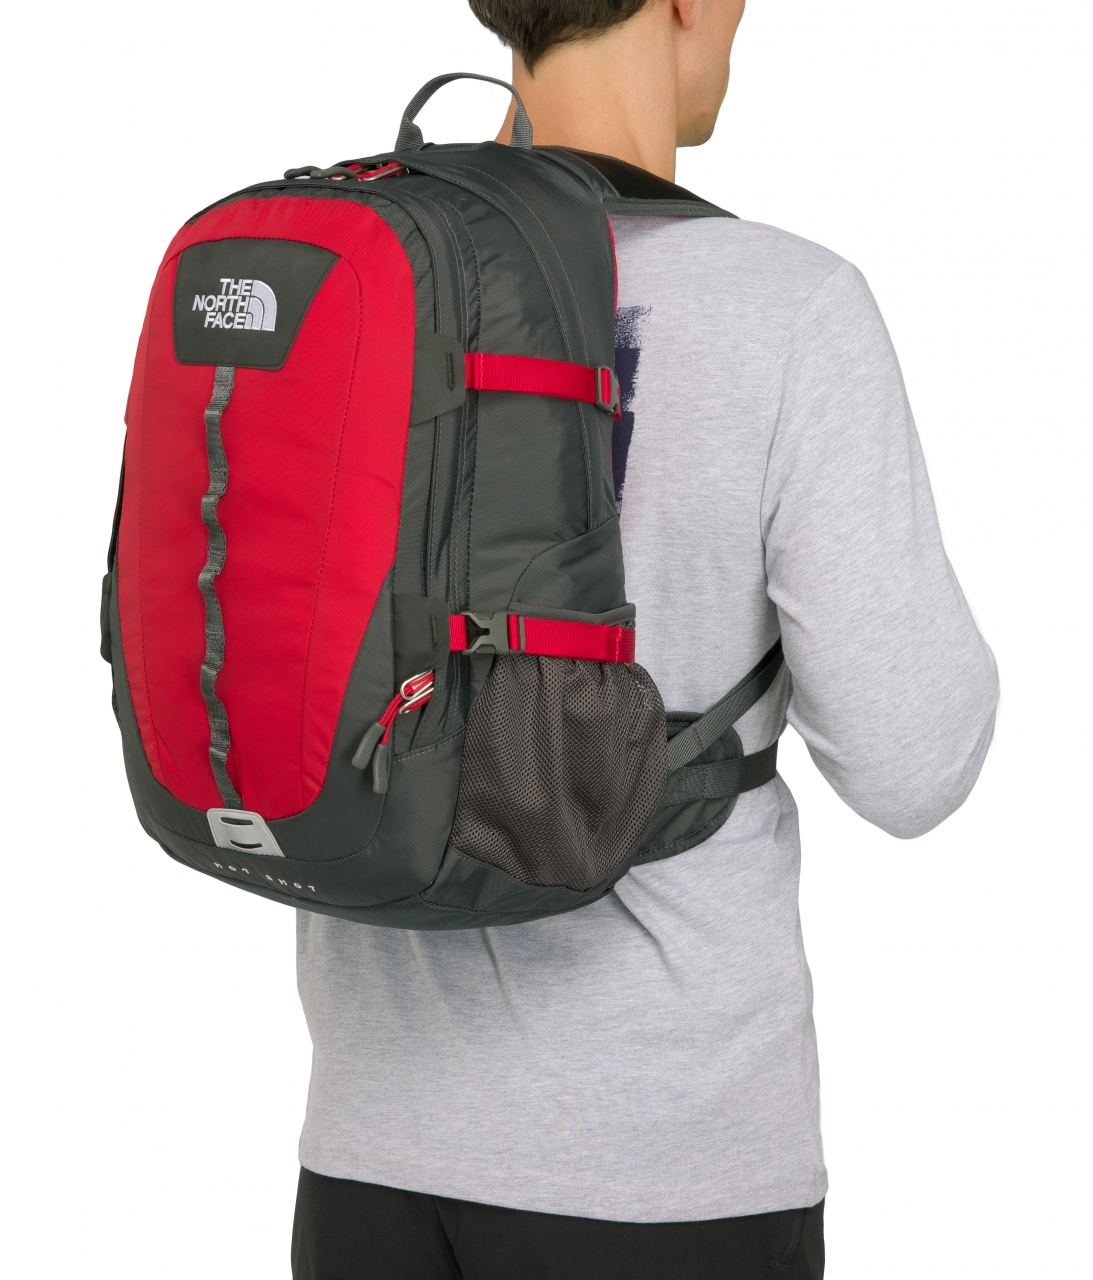 The North Face Hot Shot Rugzak Rood